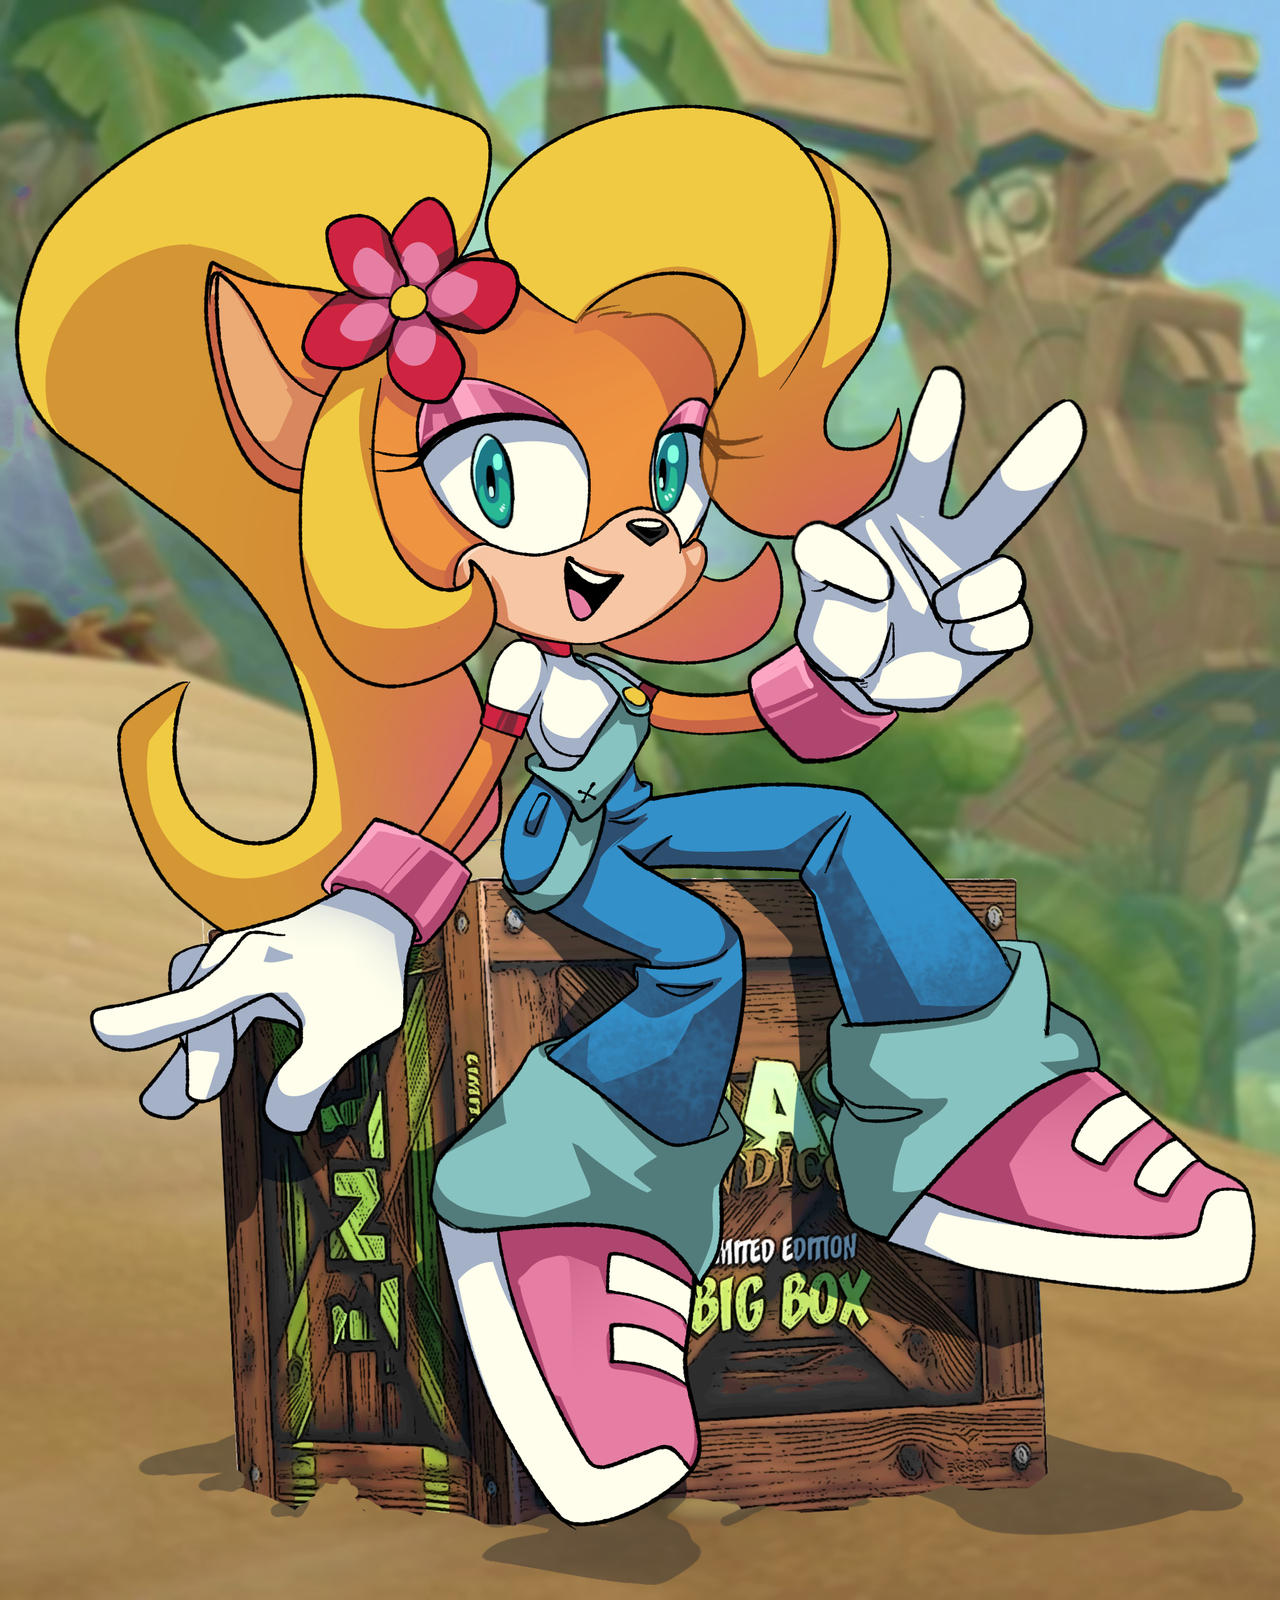 Coco Bandicoot sonic style by someone892 on DeviantArt